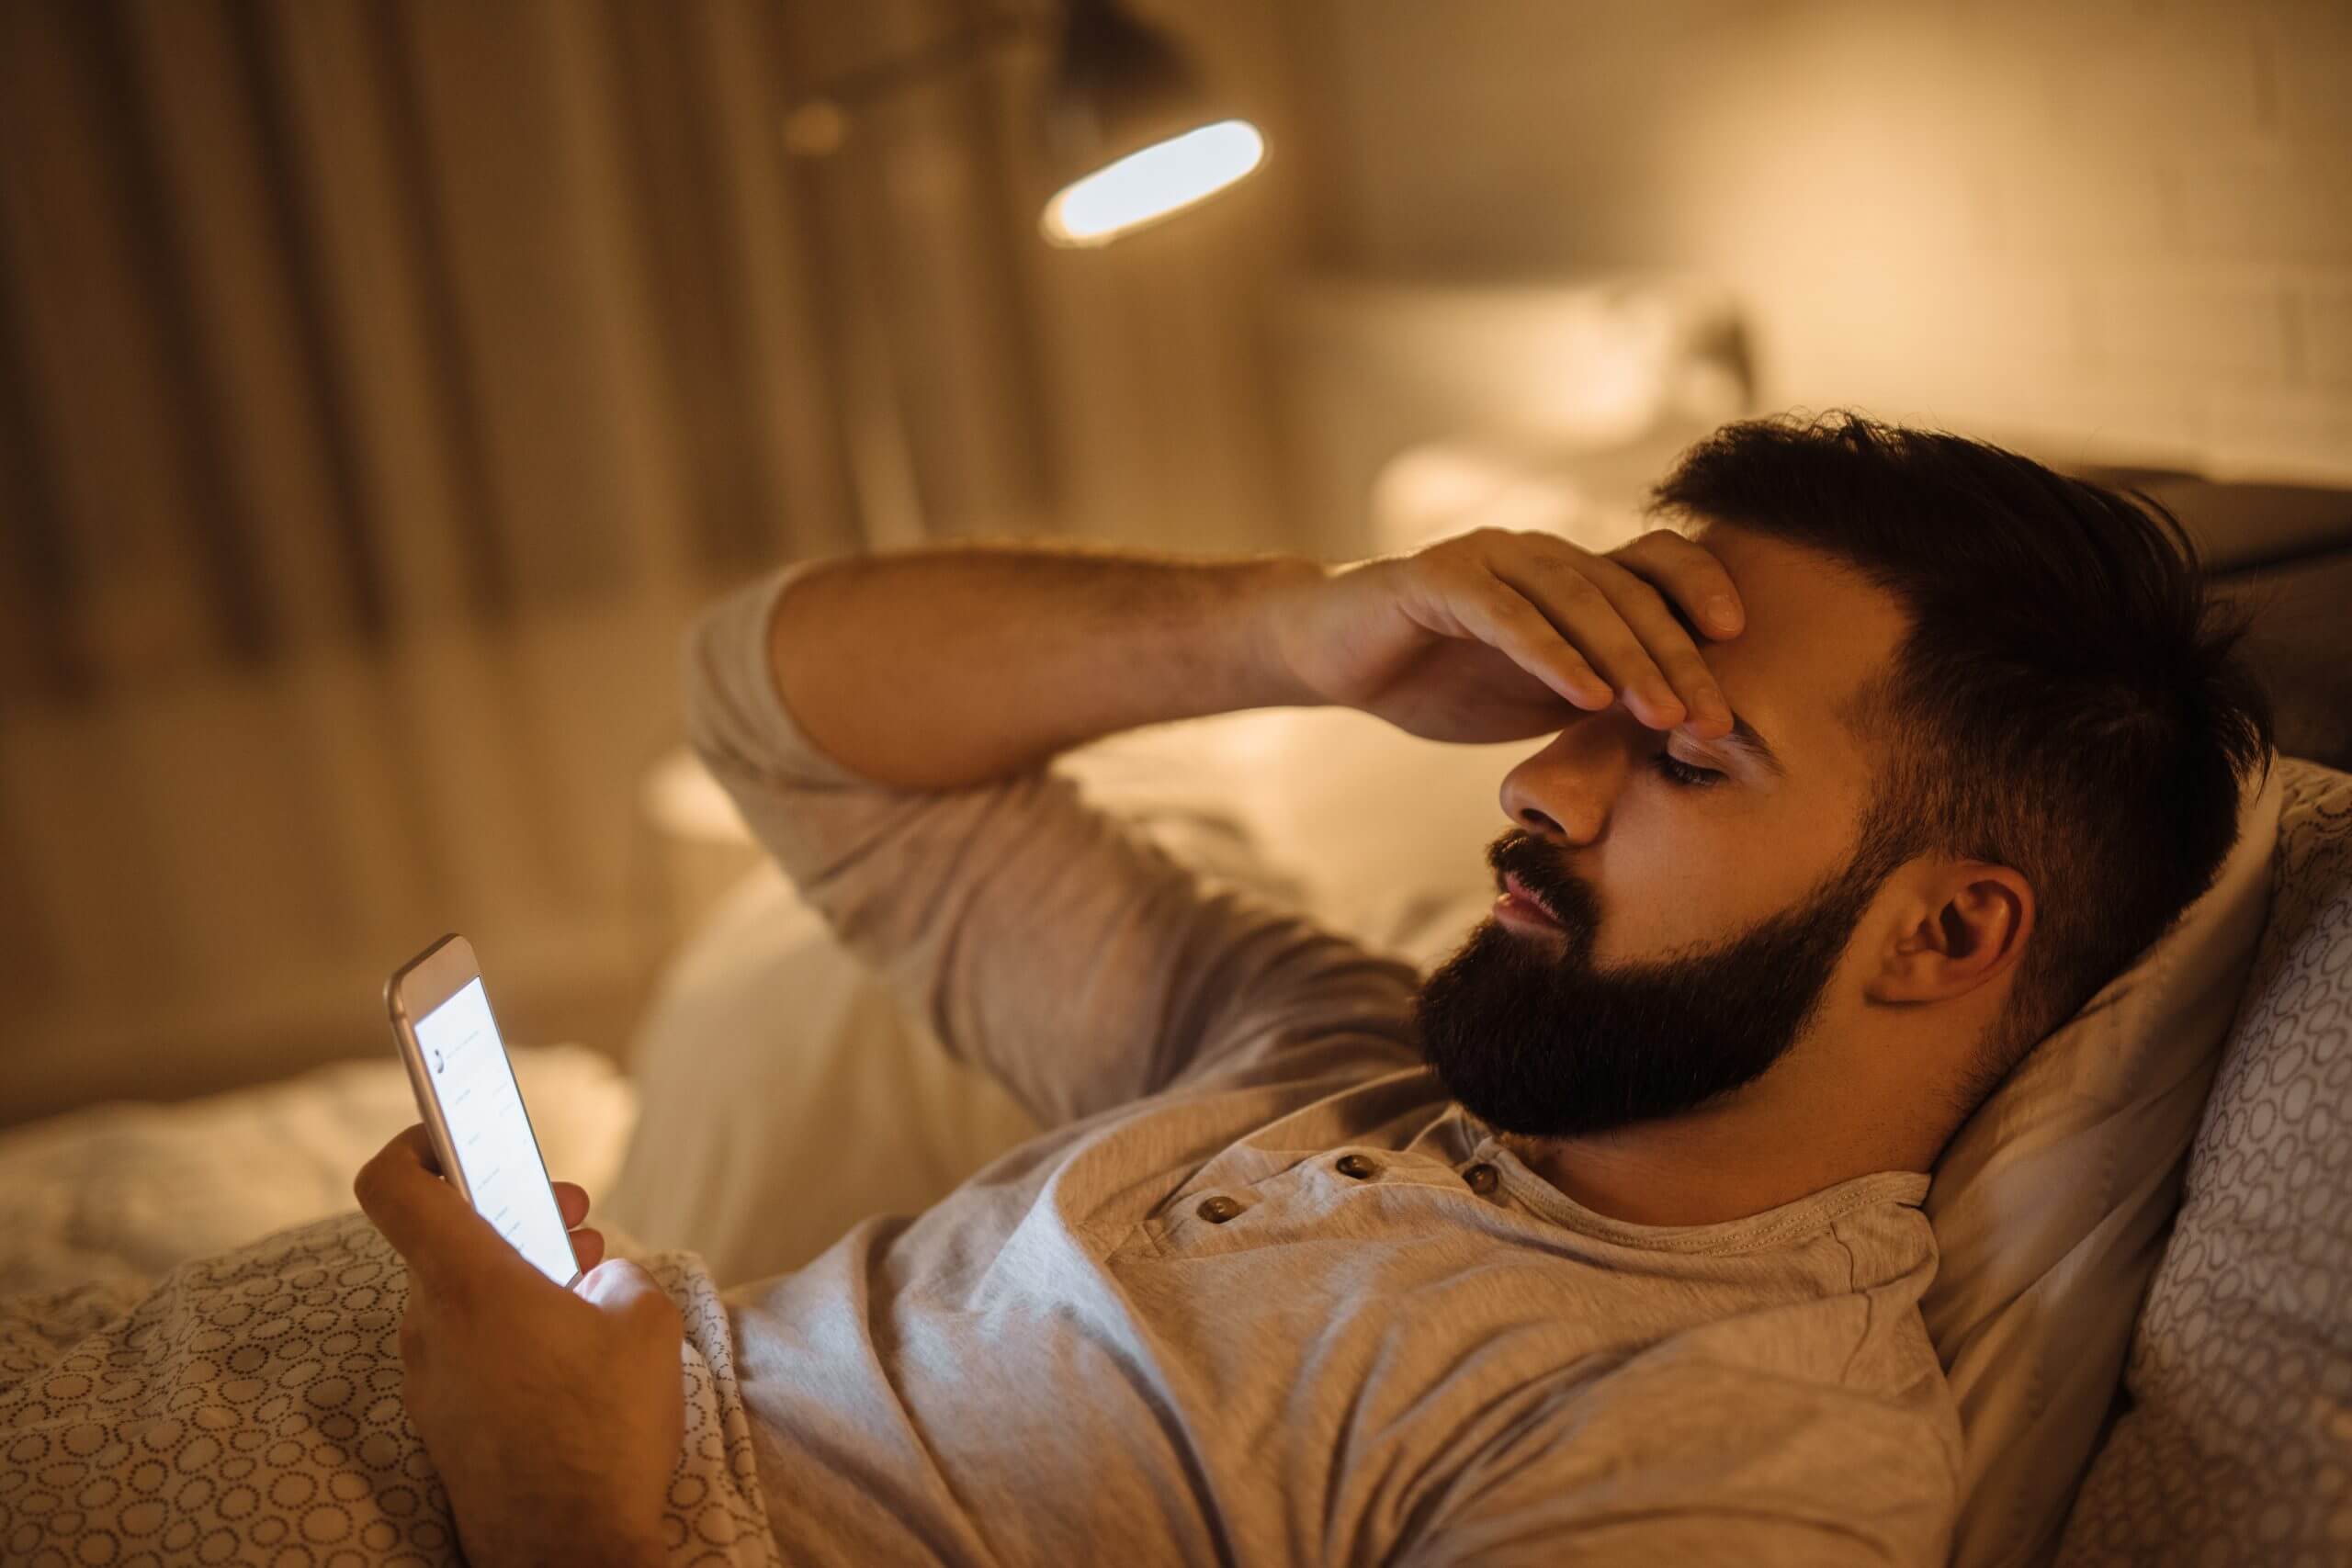 Man lying in bed using personal phone for business text messaging